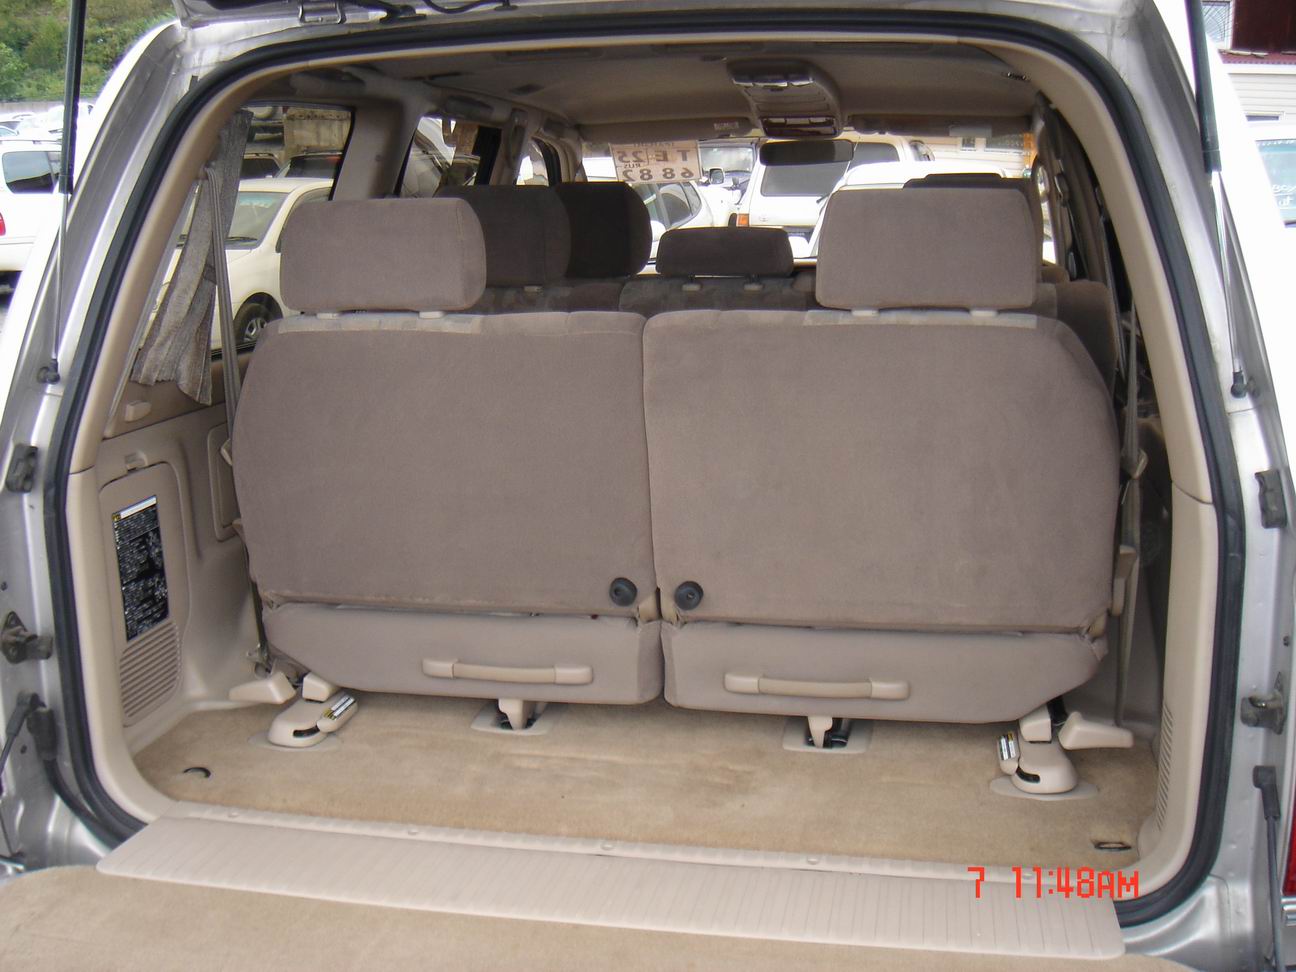 1999 Toyota Land Cruiser Pictures